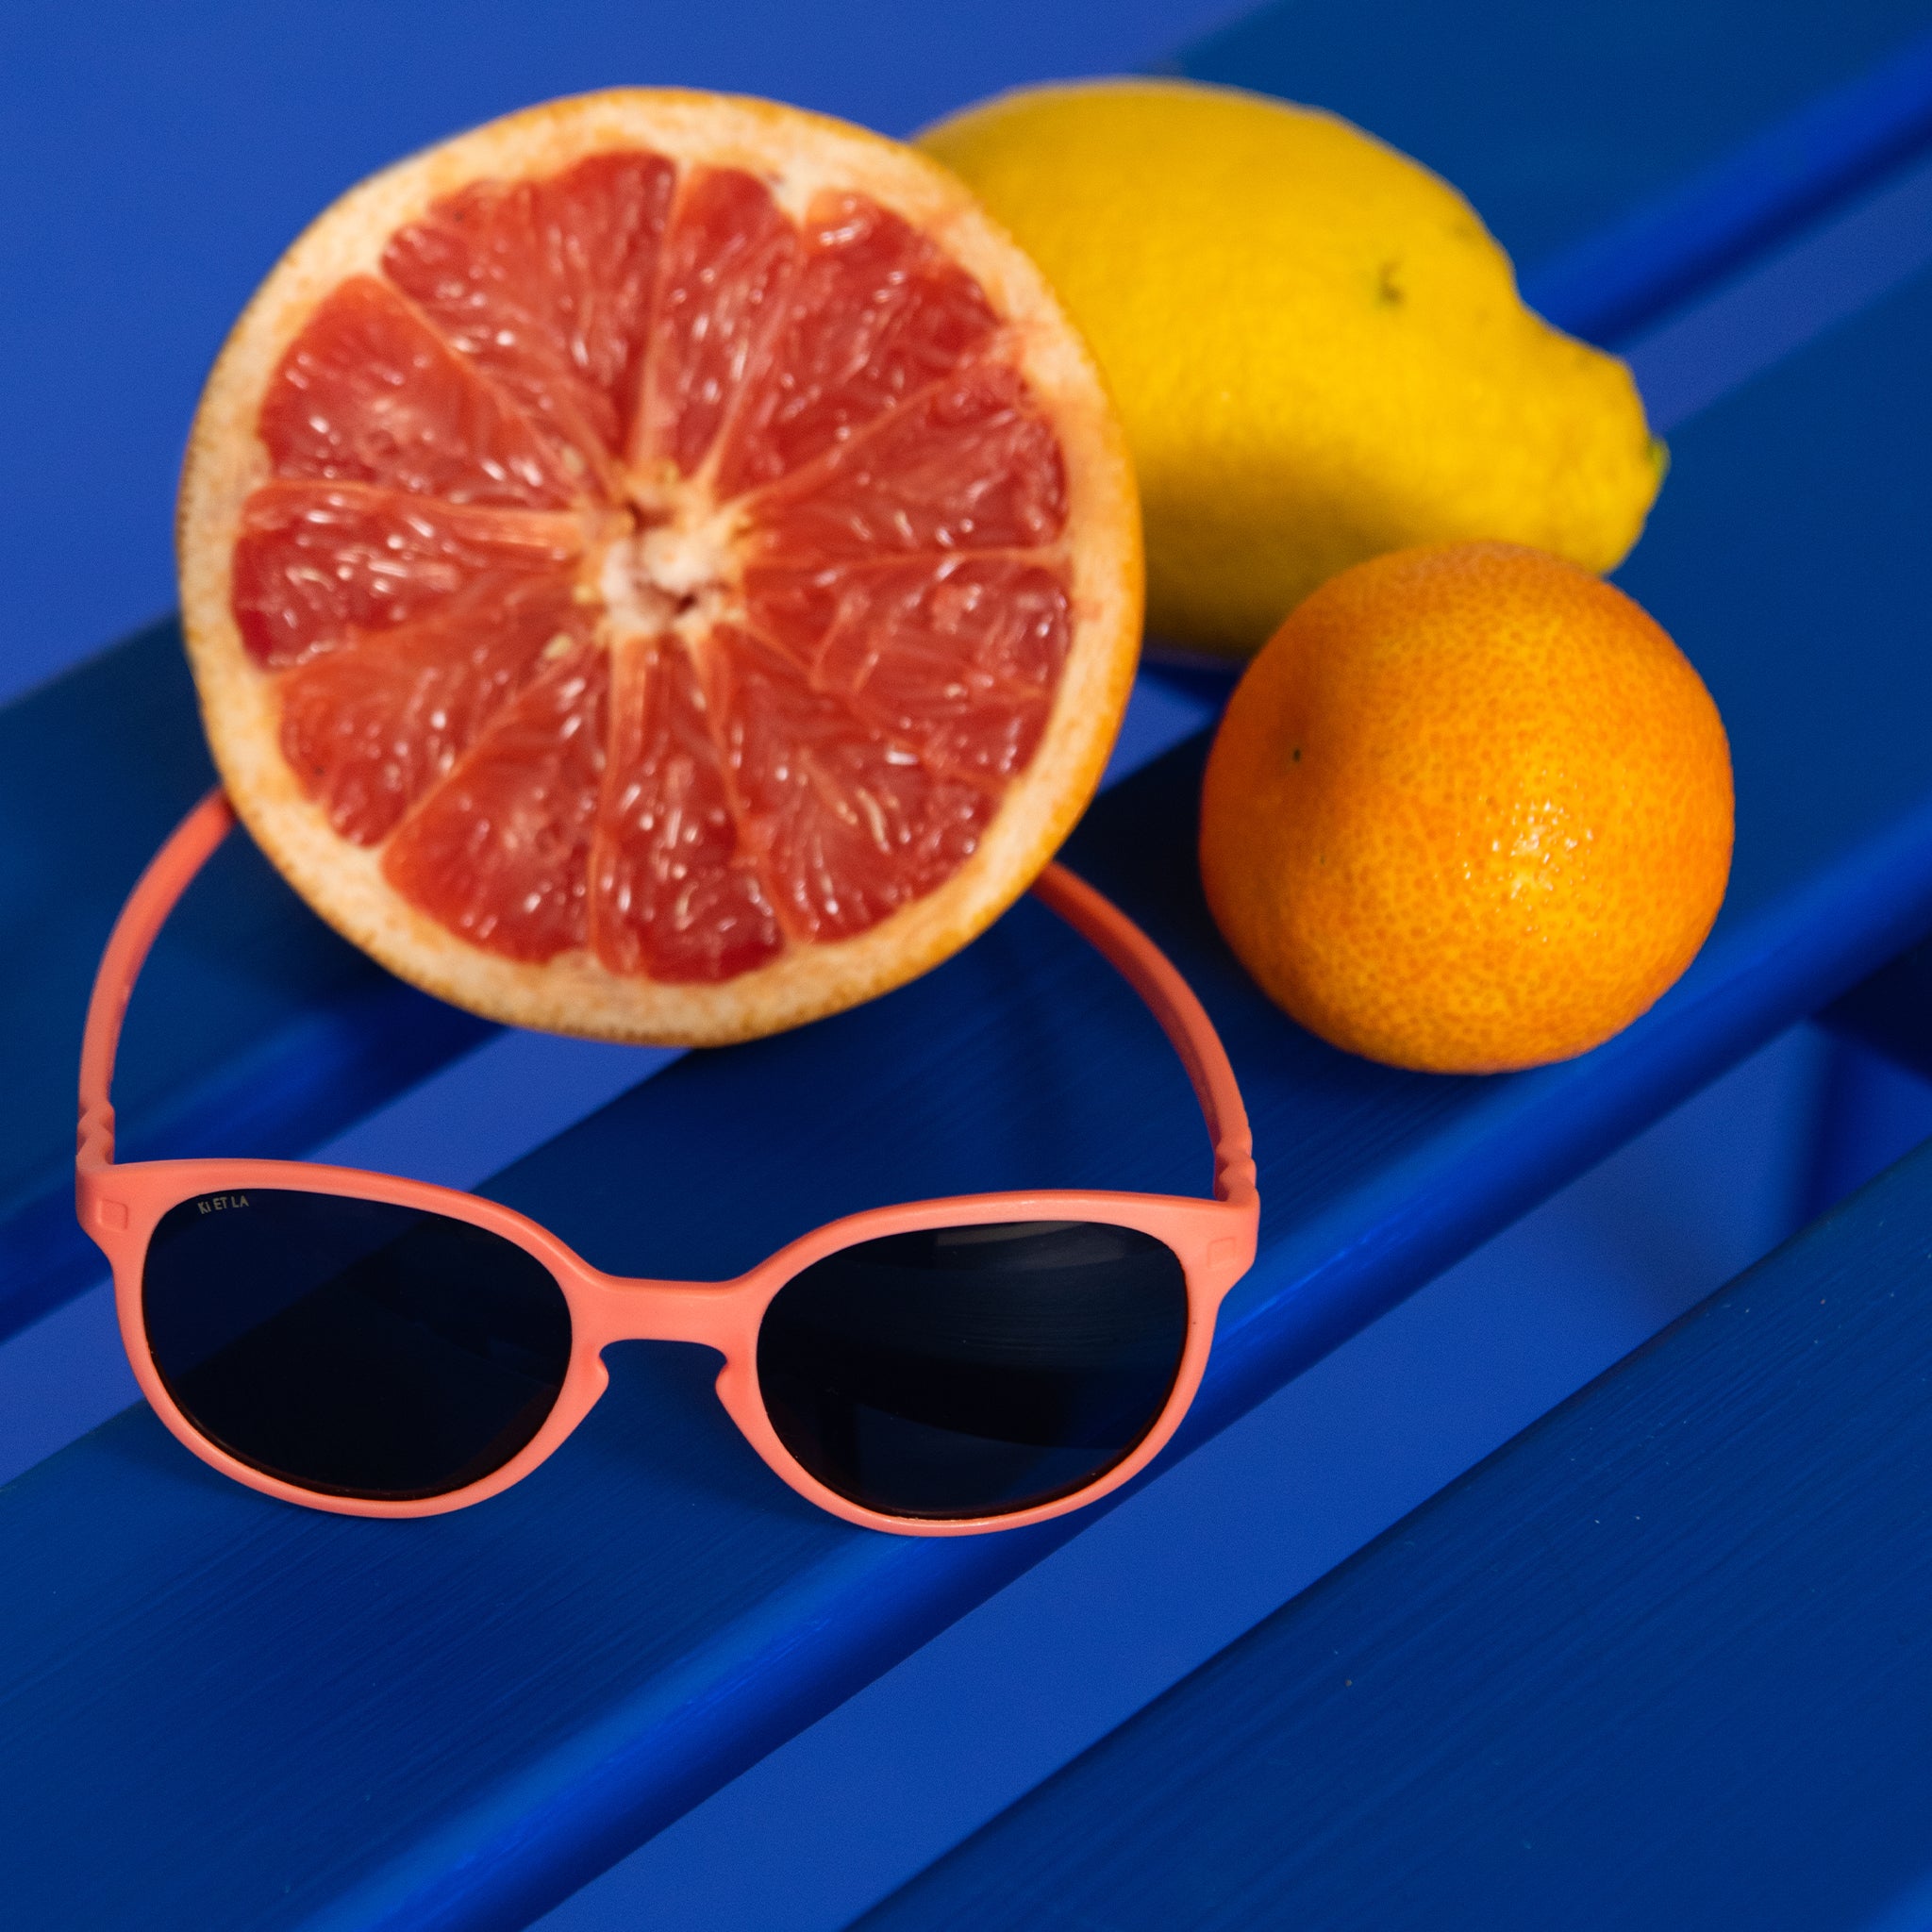 Pink todder sunglasses on a royal blue background with citrus fruits